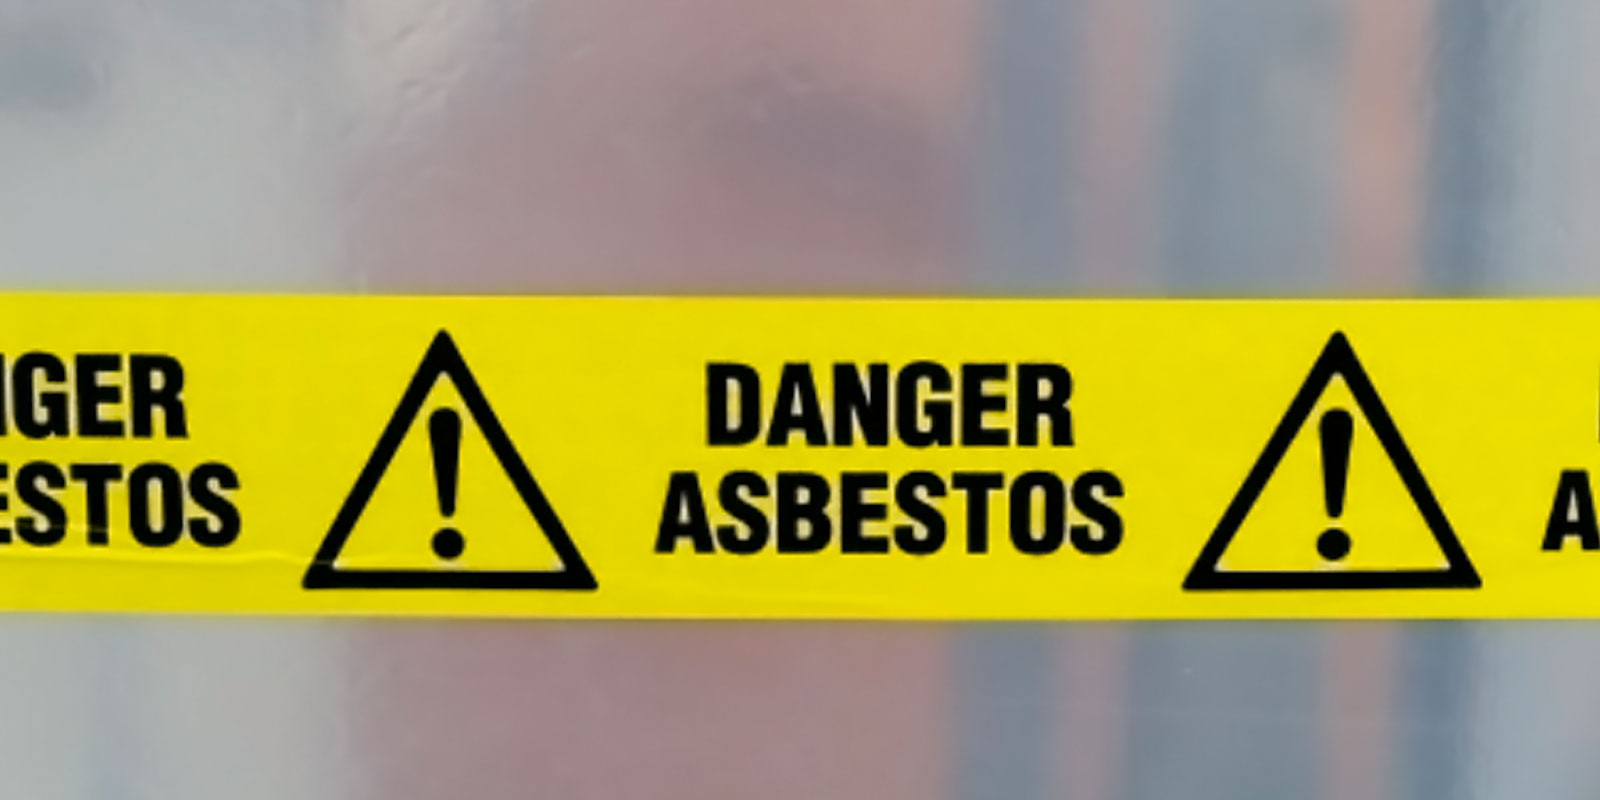 Exposed is a dangerous substance that leads to mesothelioma, contact a skilled Asbestos lawyer for help.